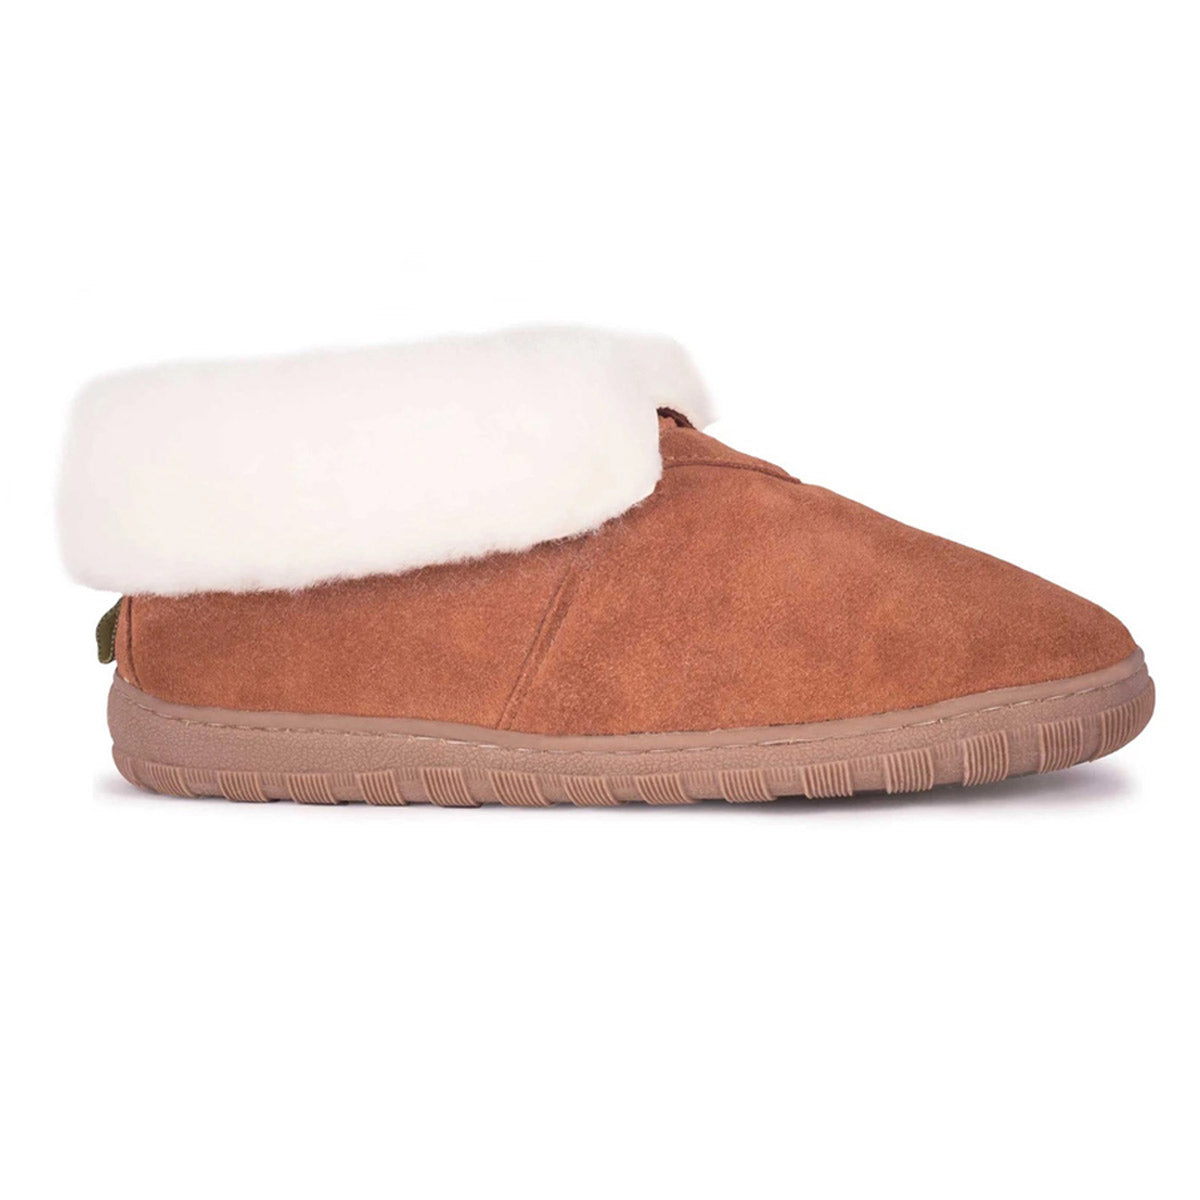 A single Cloud Nine Ladies Bootie Chestnut slipper with a suede leather upper and white fluffy lining on a white background.